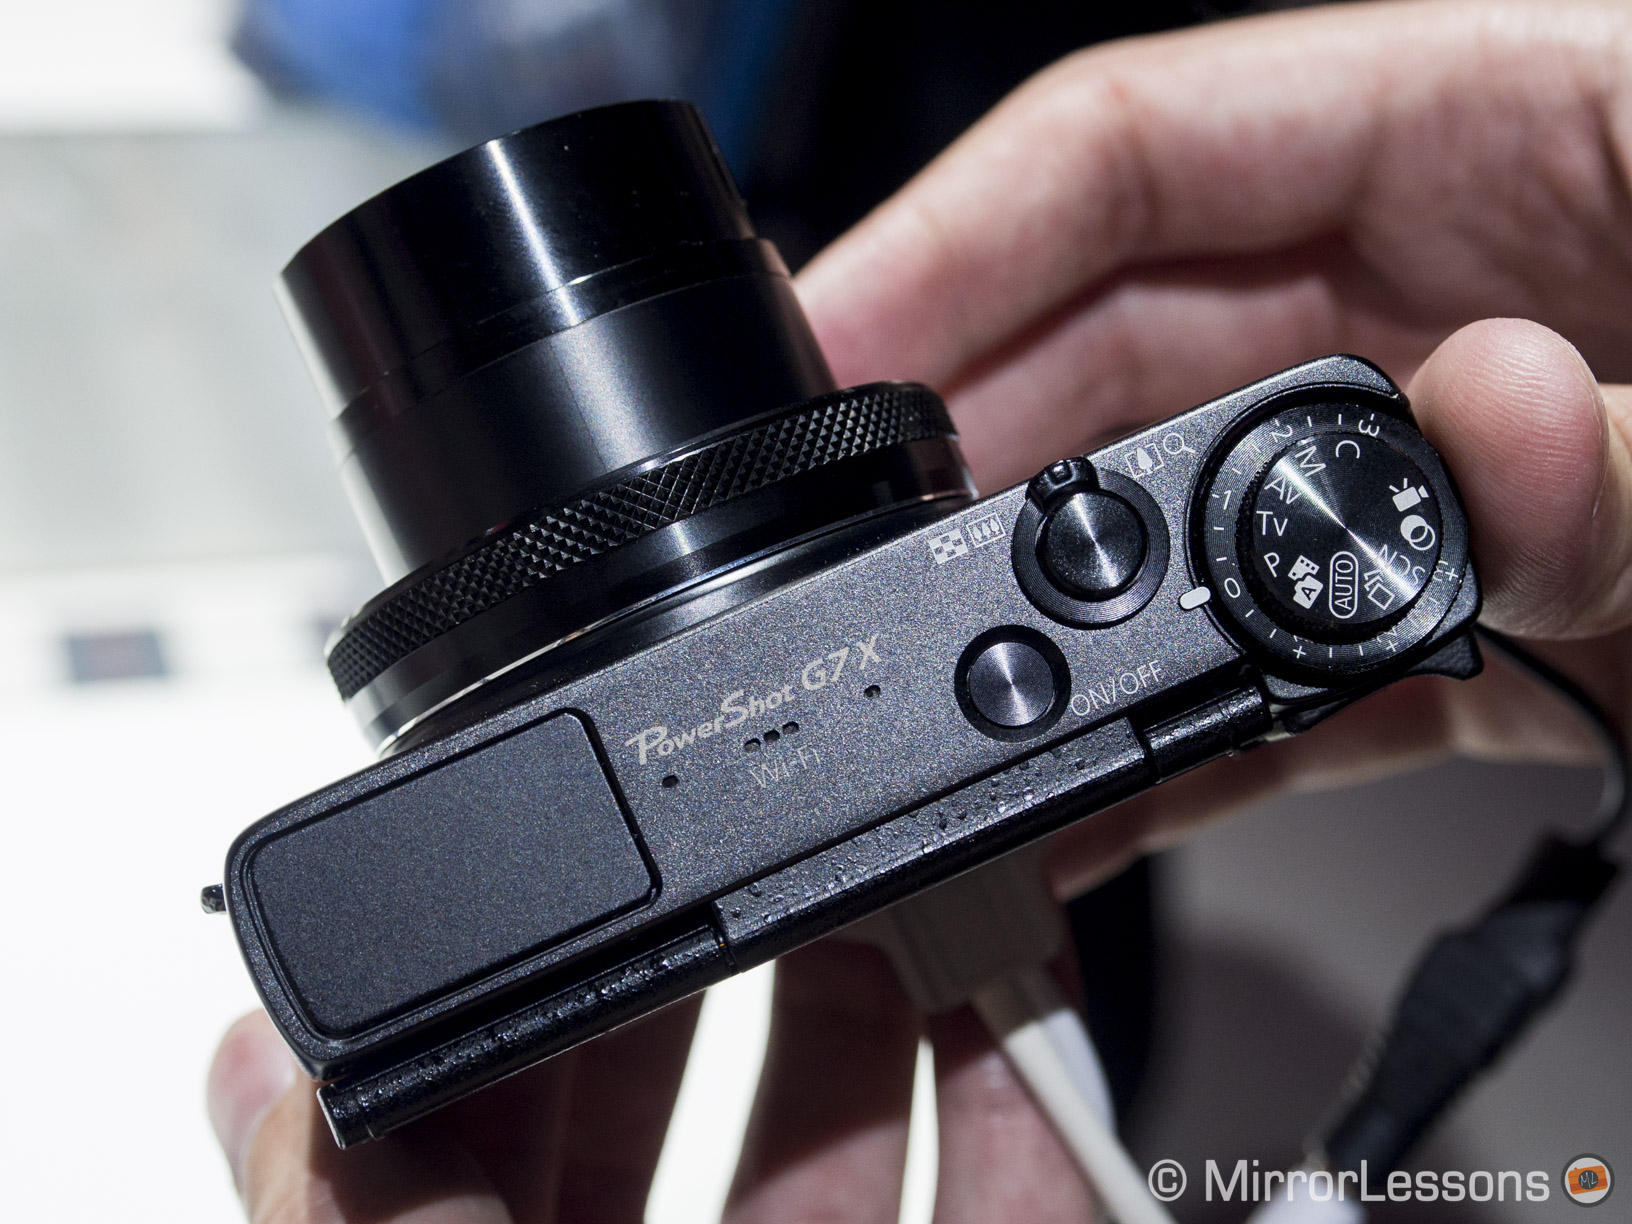 Photokina 2014: Hands-on with the Canon PowerShot G7X a.k.a. the RX100